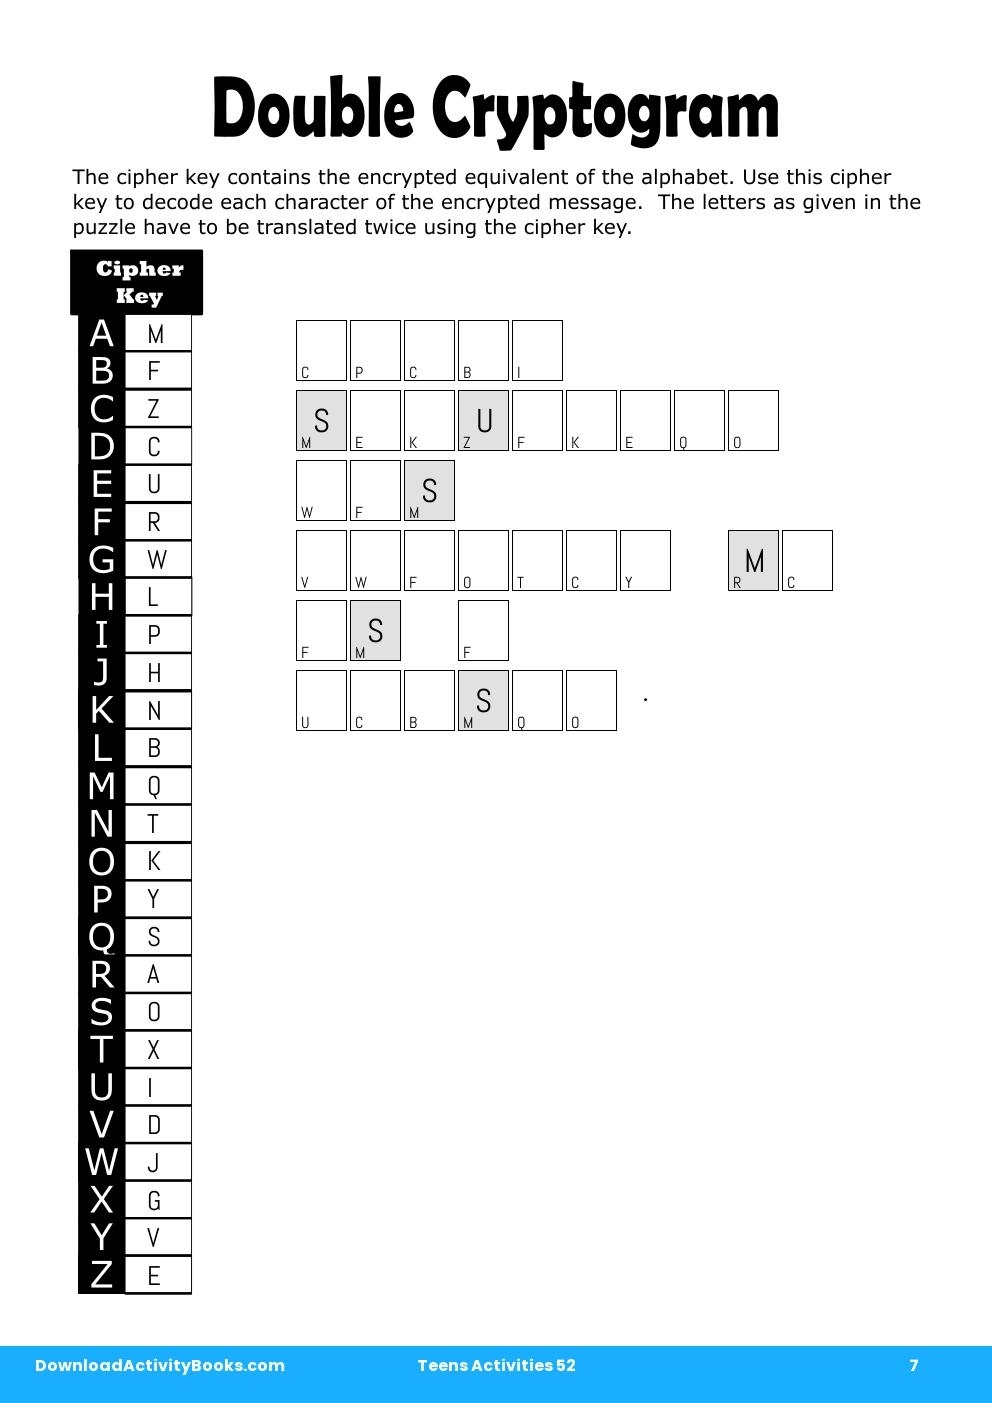 download-double-cryptogram-in-teens-activities-52-math-worksheet-answers